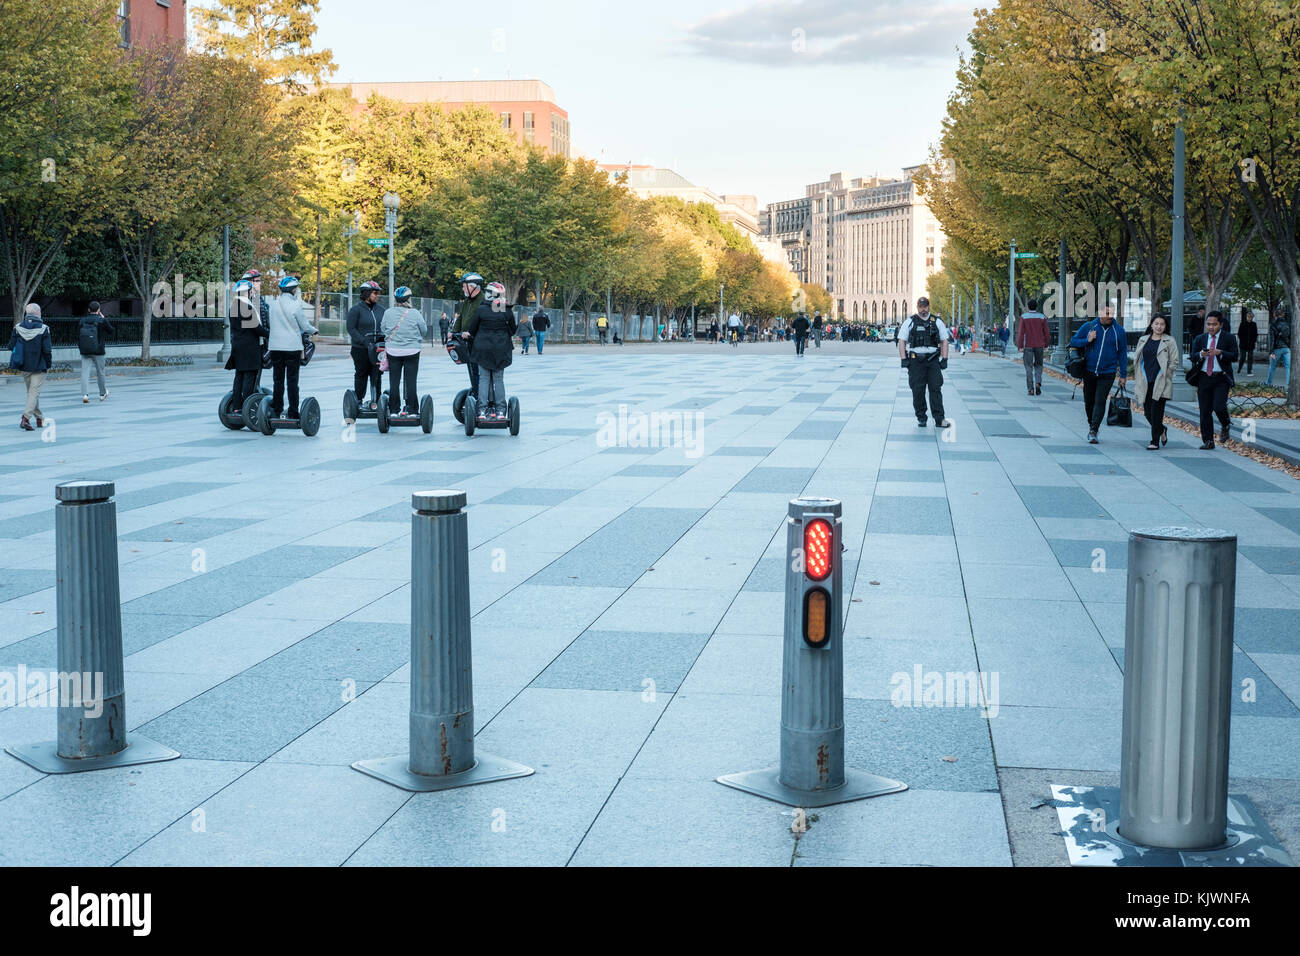 Bollards, security barriers preventing vehicle traffic access to Pennsylvania Ave NW, White House, Washington, D.C., USA. Stock Photo